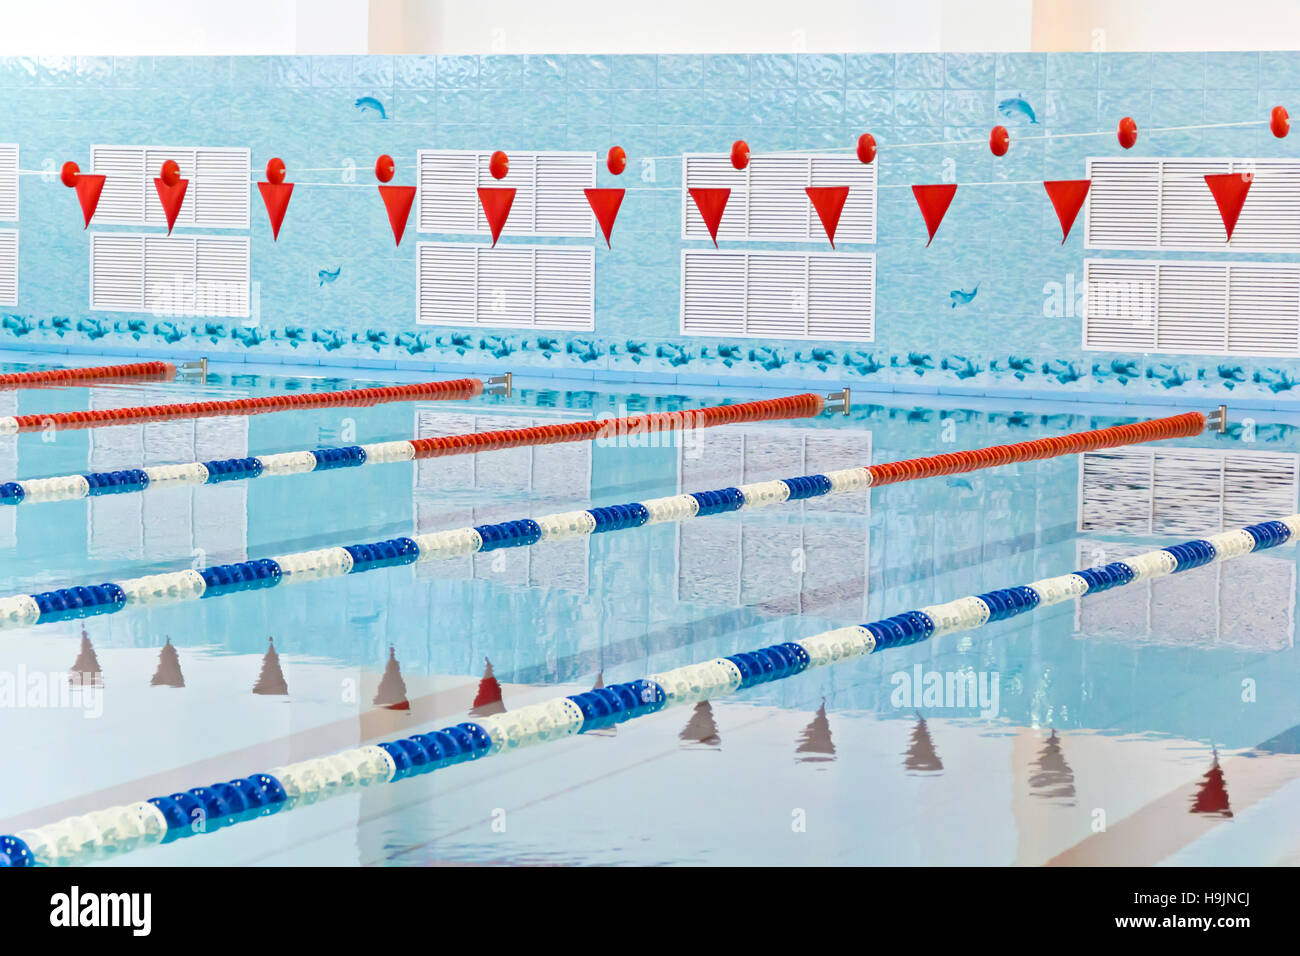 Photo of empty swimming pool with red flags Stock Photo